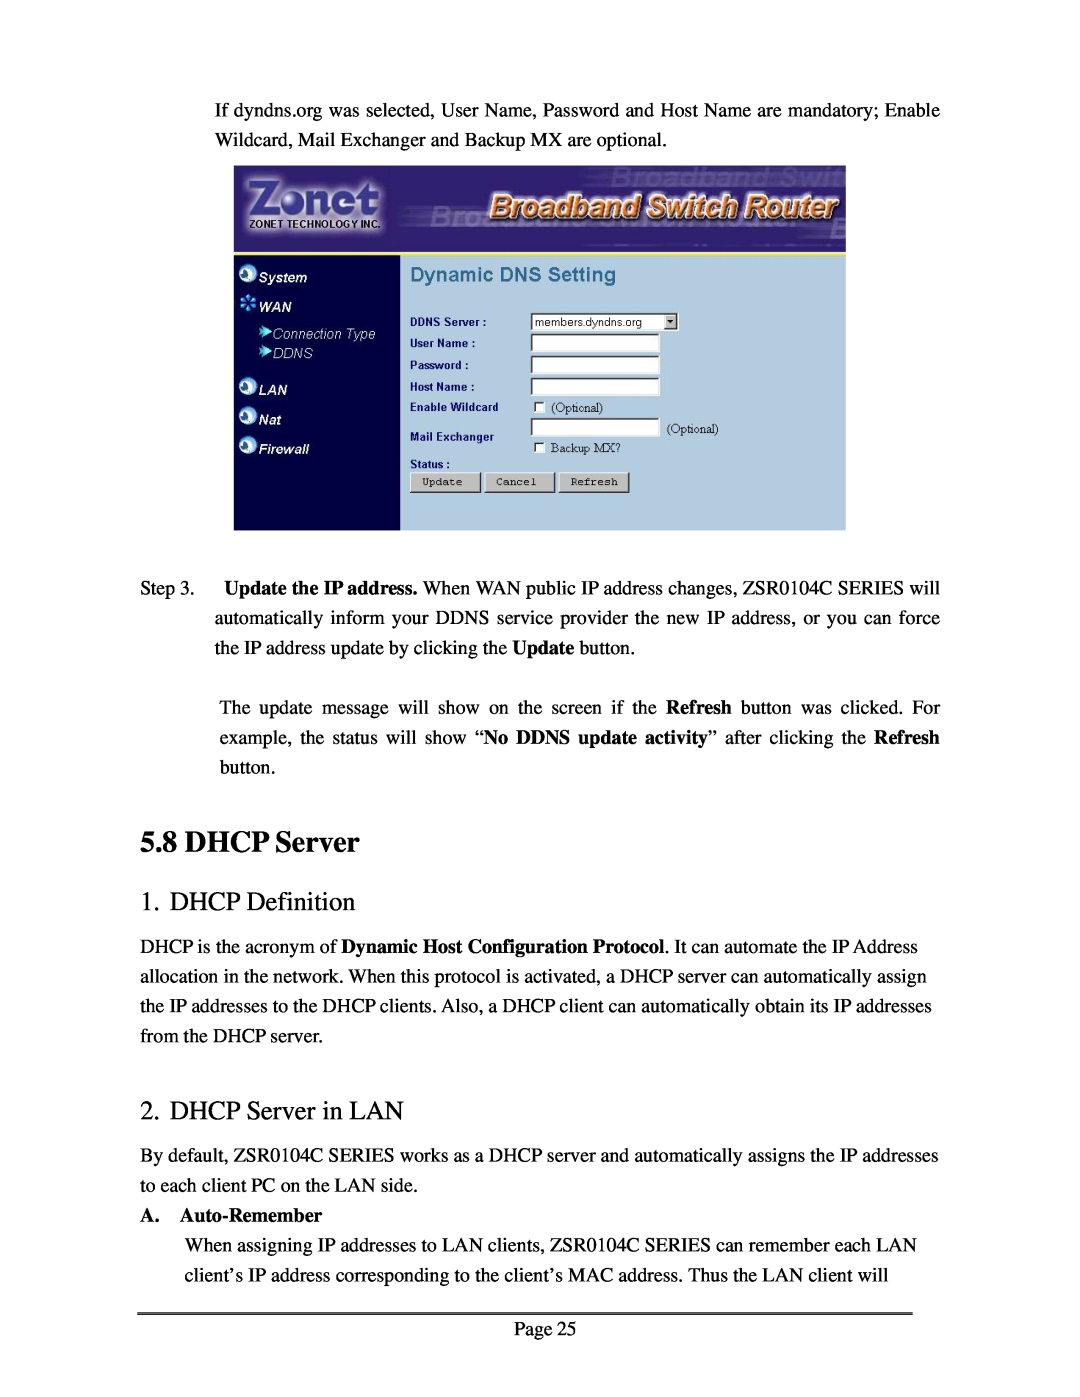 Zonet Technology ZSR0104C Series user manual DHCP Definition, DHCP Server in LAN, A. Auto-Remember 